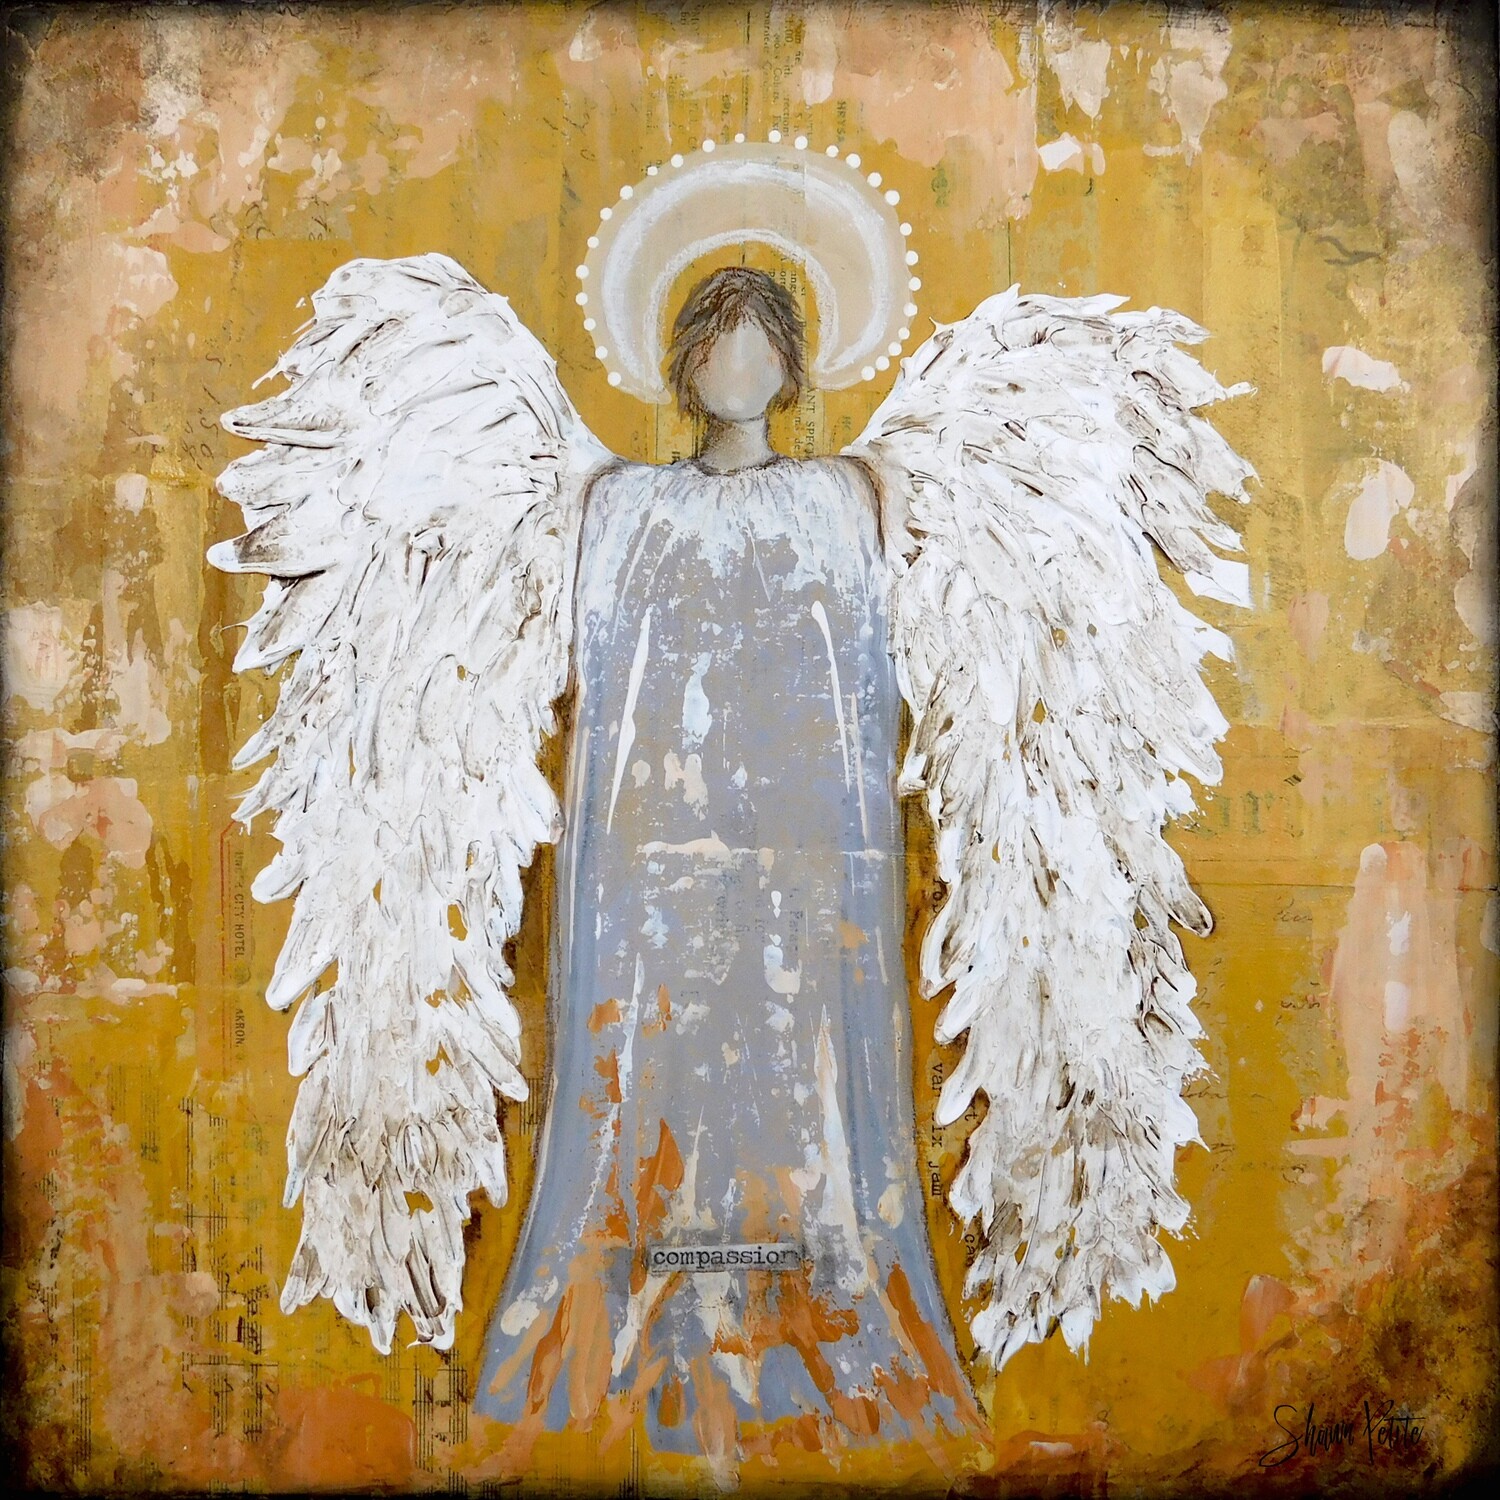 "Angel of Compassion" Print on Wood and Print to be Framed